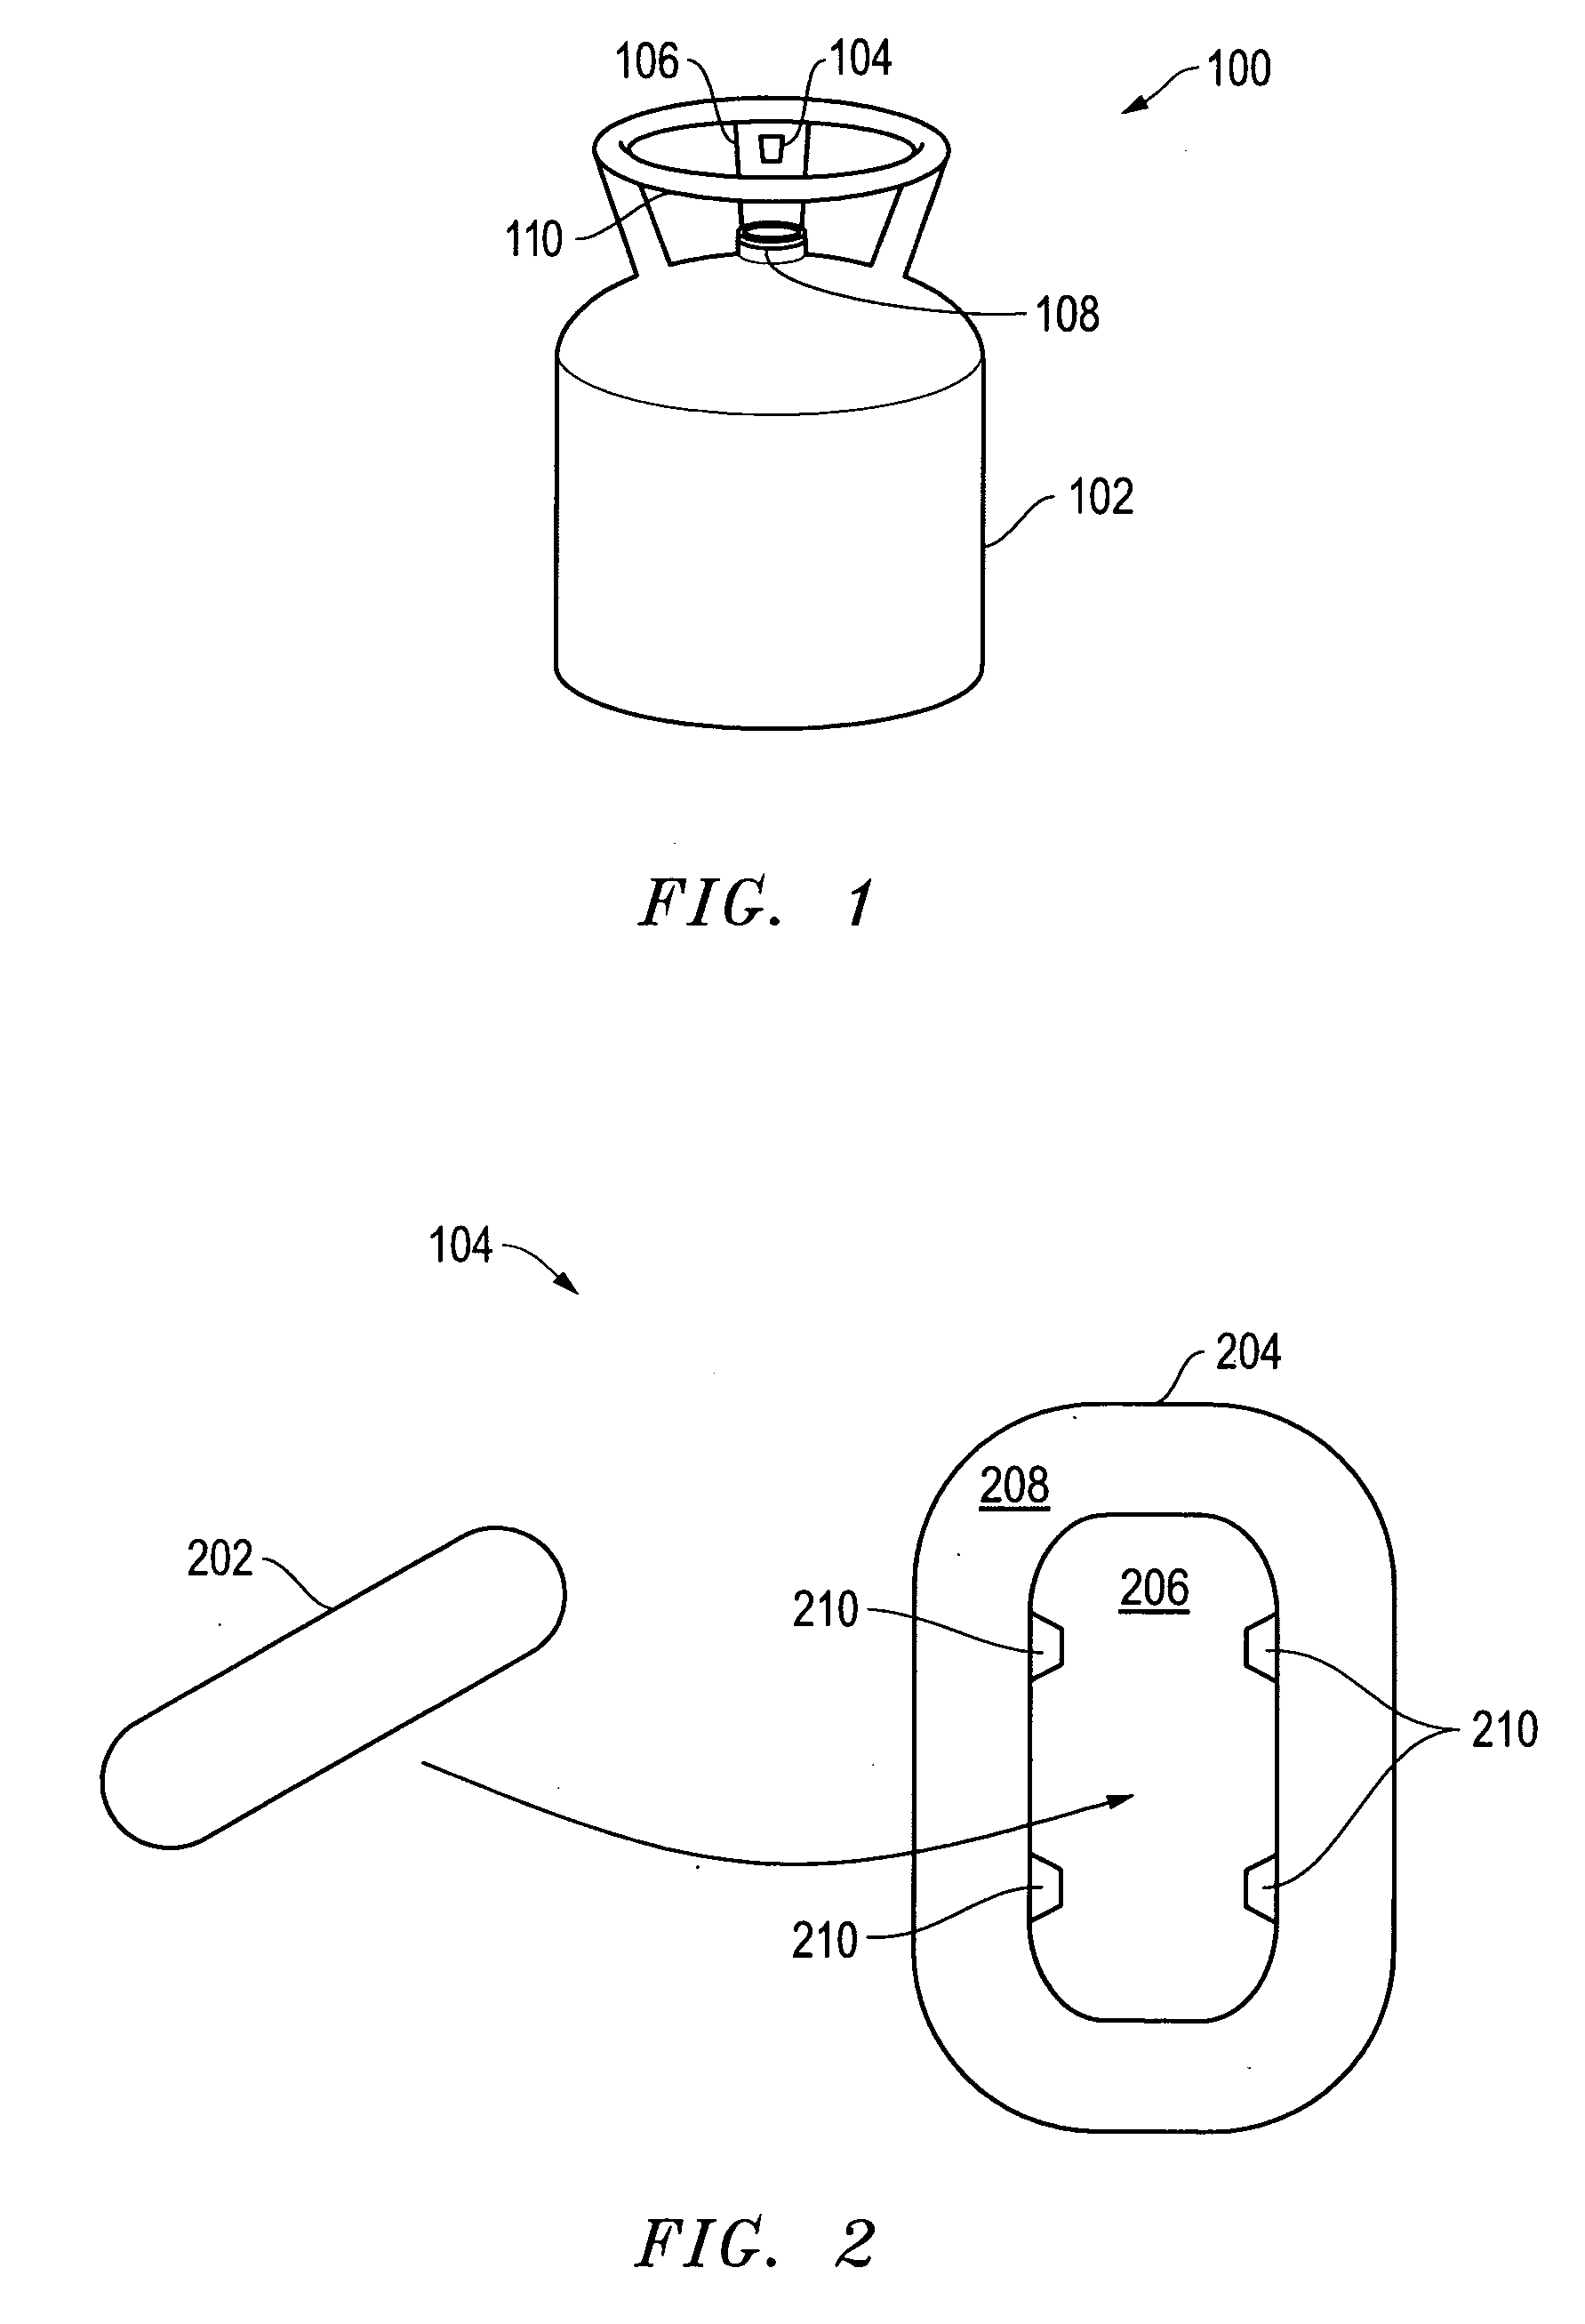 Tamper resistant RFID tags and associated methods